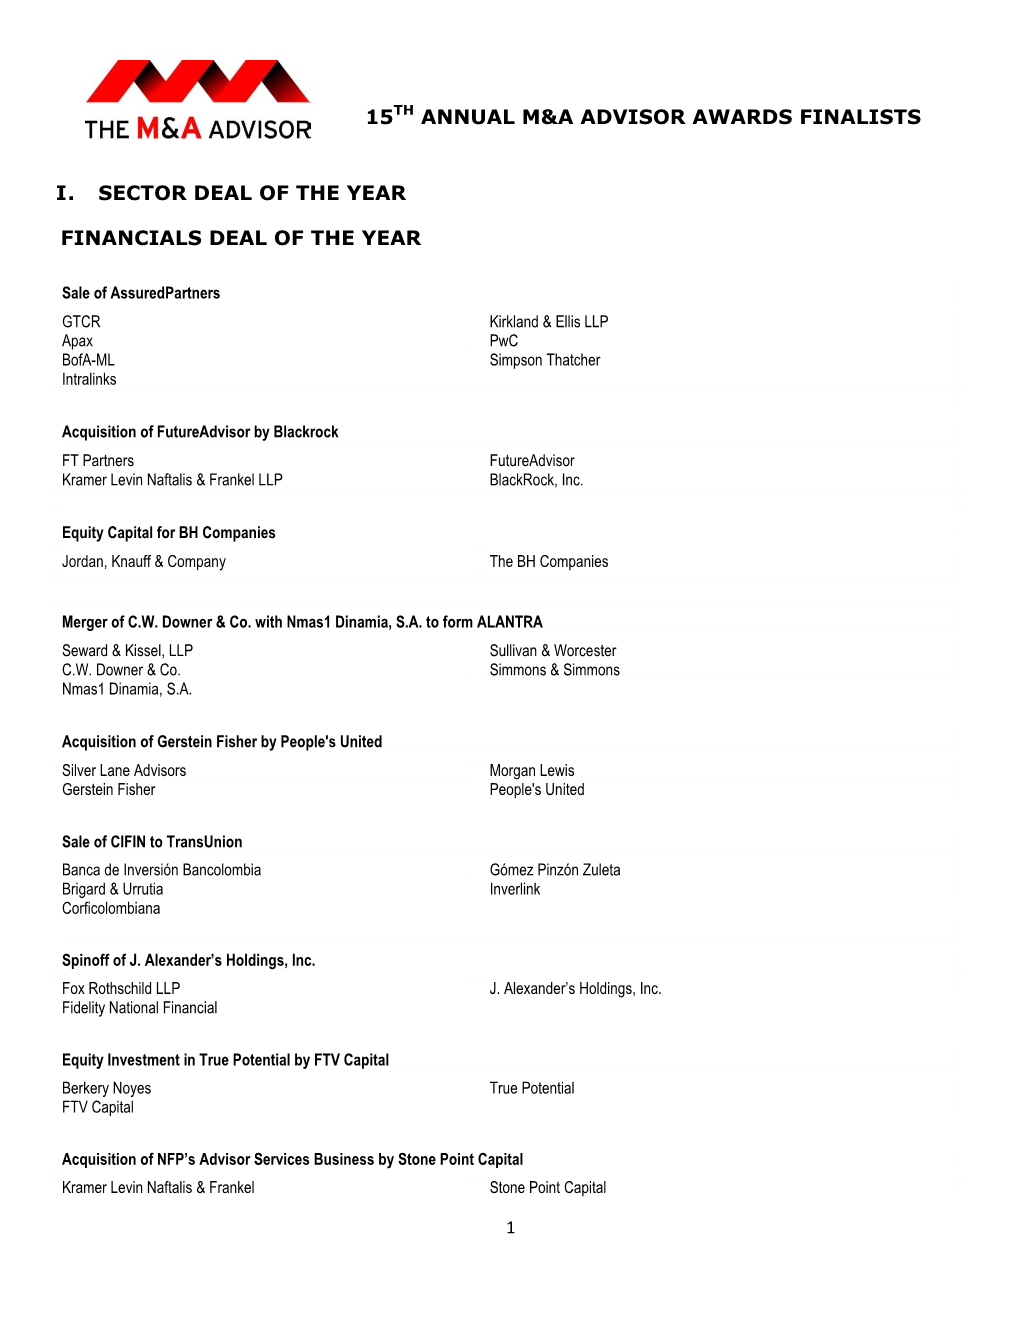 15Th Annual M&A Advisor Awards Finalists I. Sector Deal of the Year Financials Deal of the Year